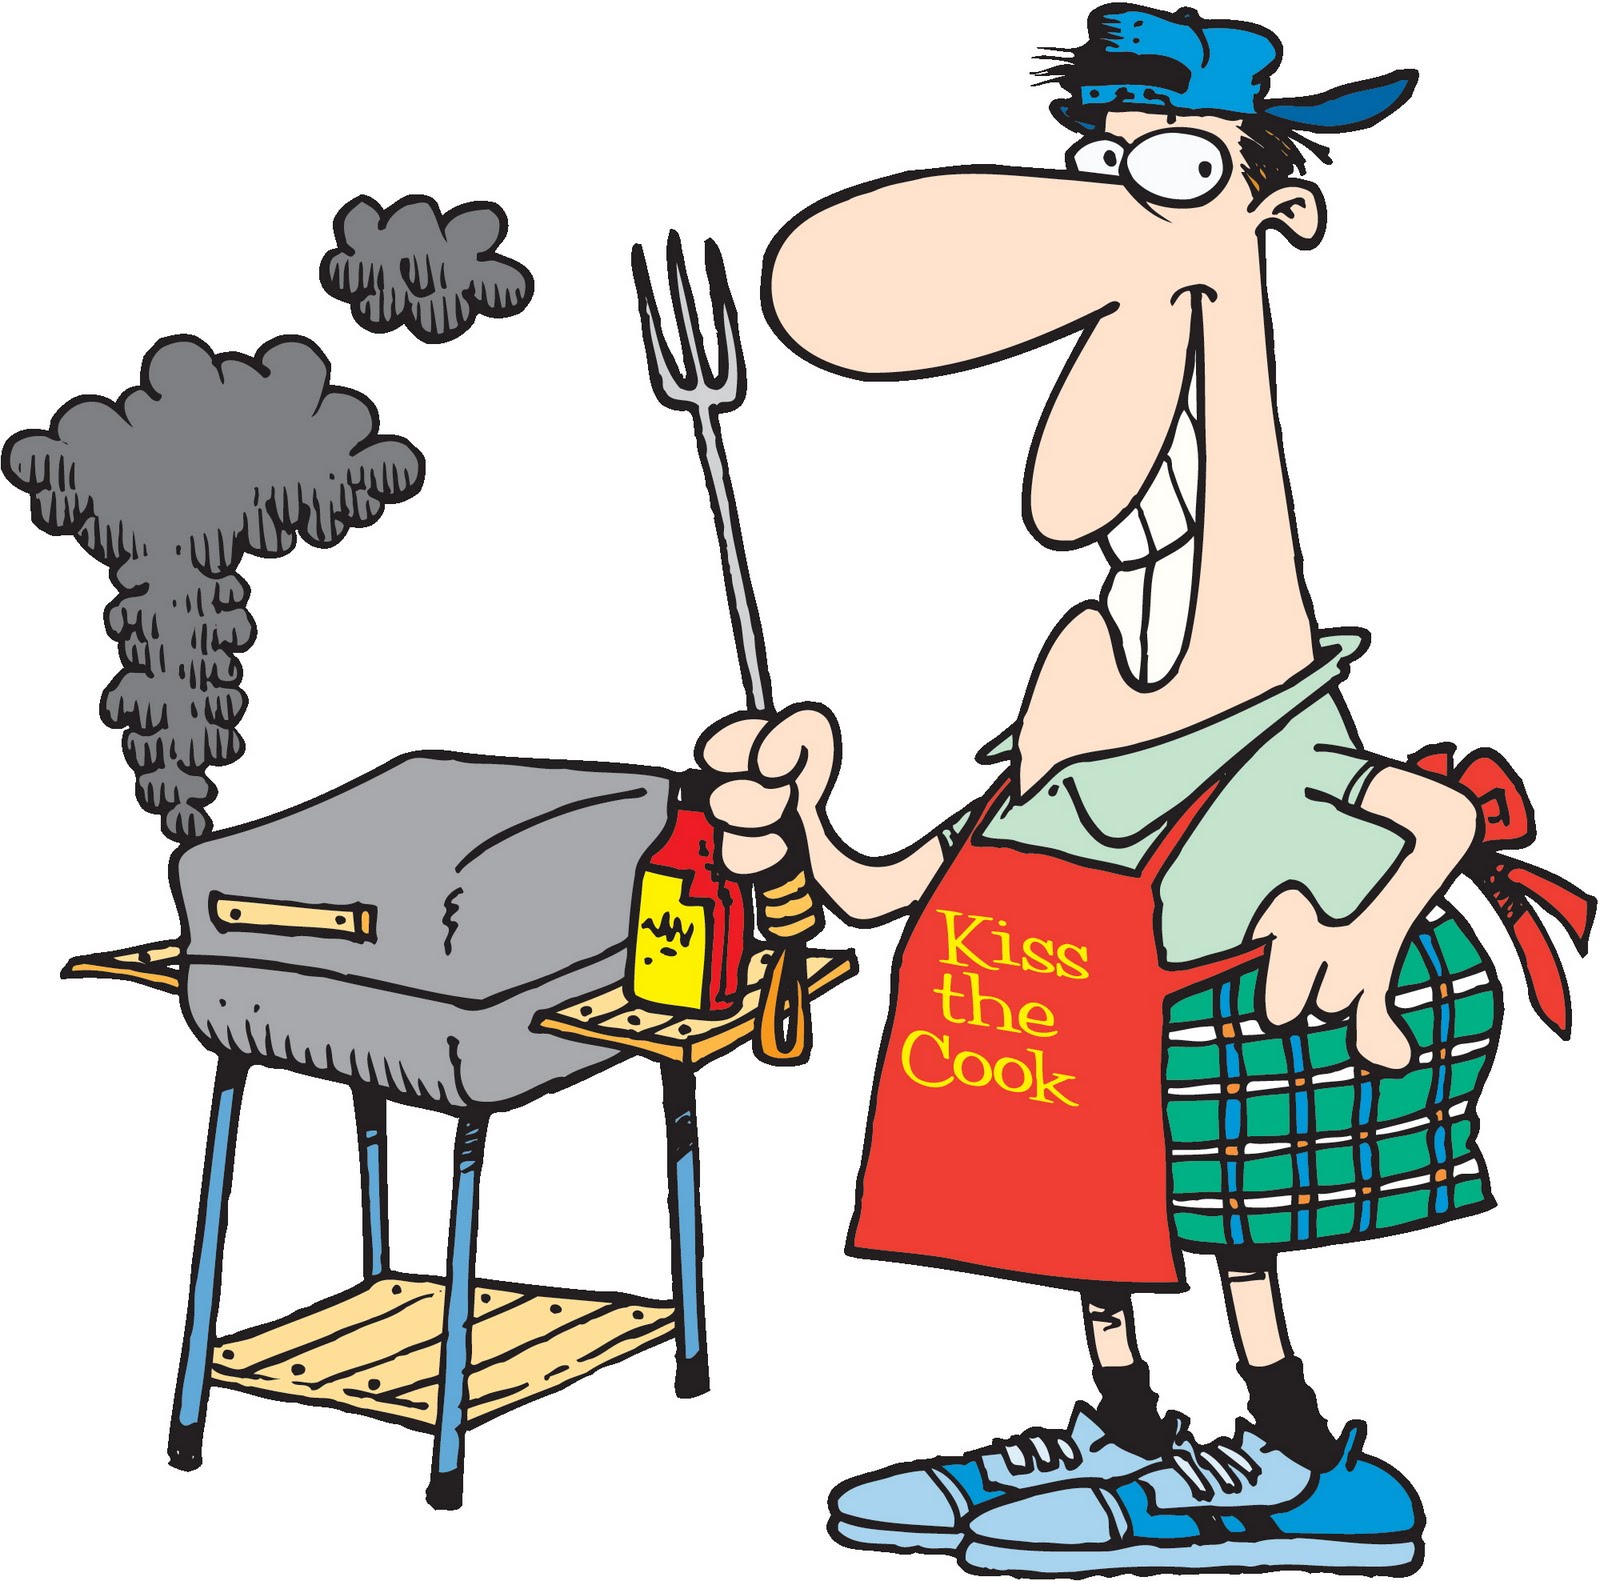 Bbq party clipart free clipart images 2.